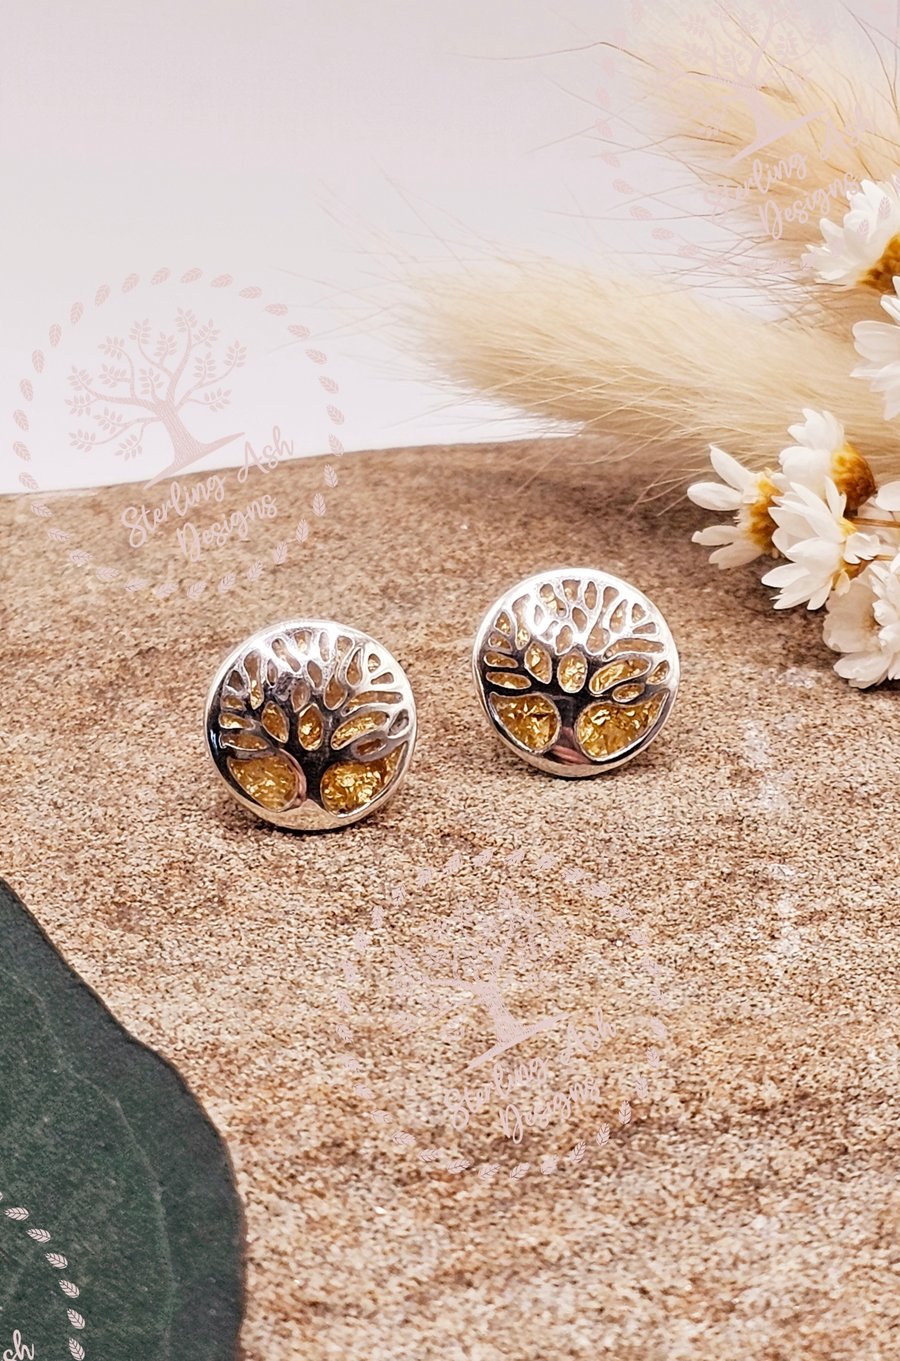 Handmade 925 sterling silver tree of life stud earrings with gold leaf